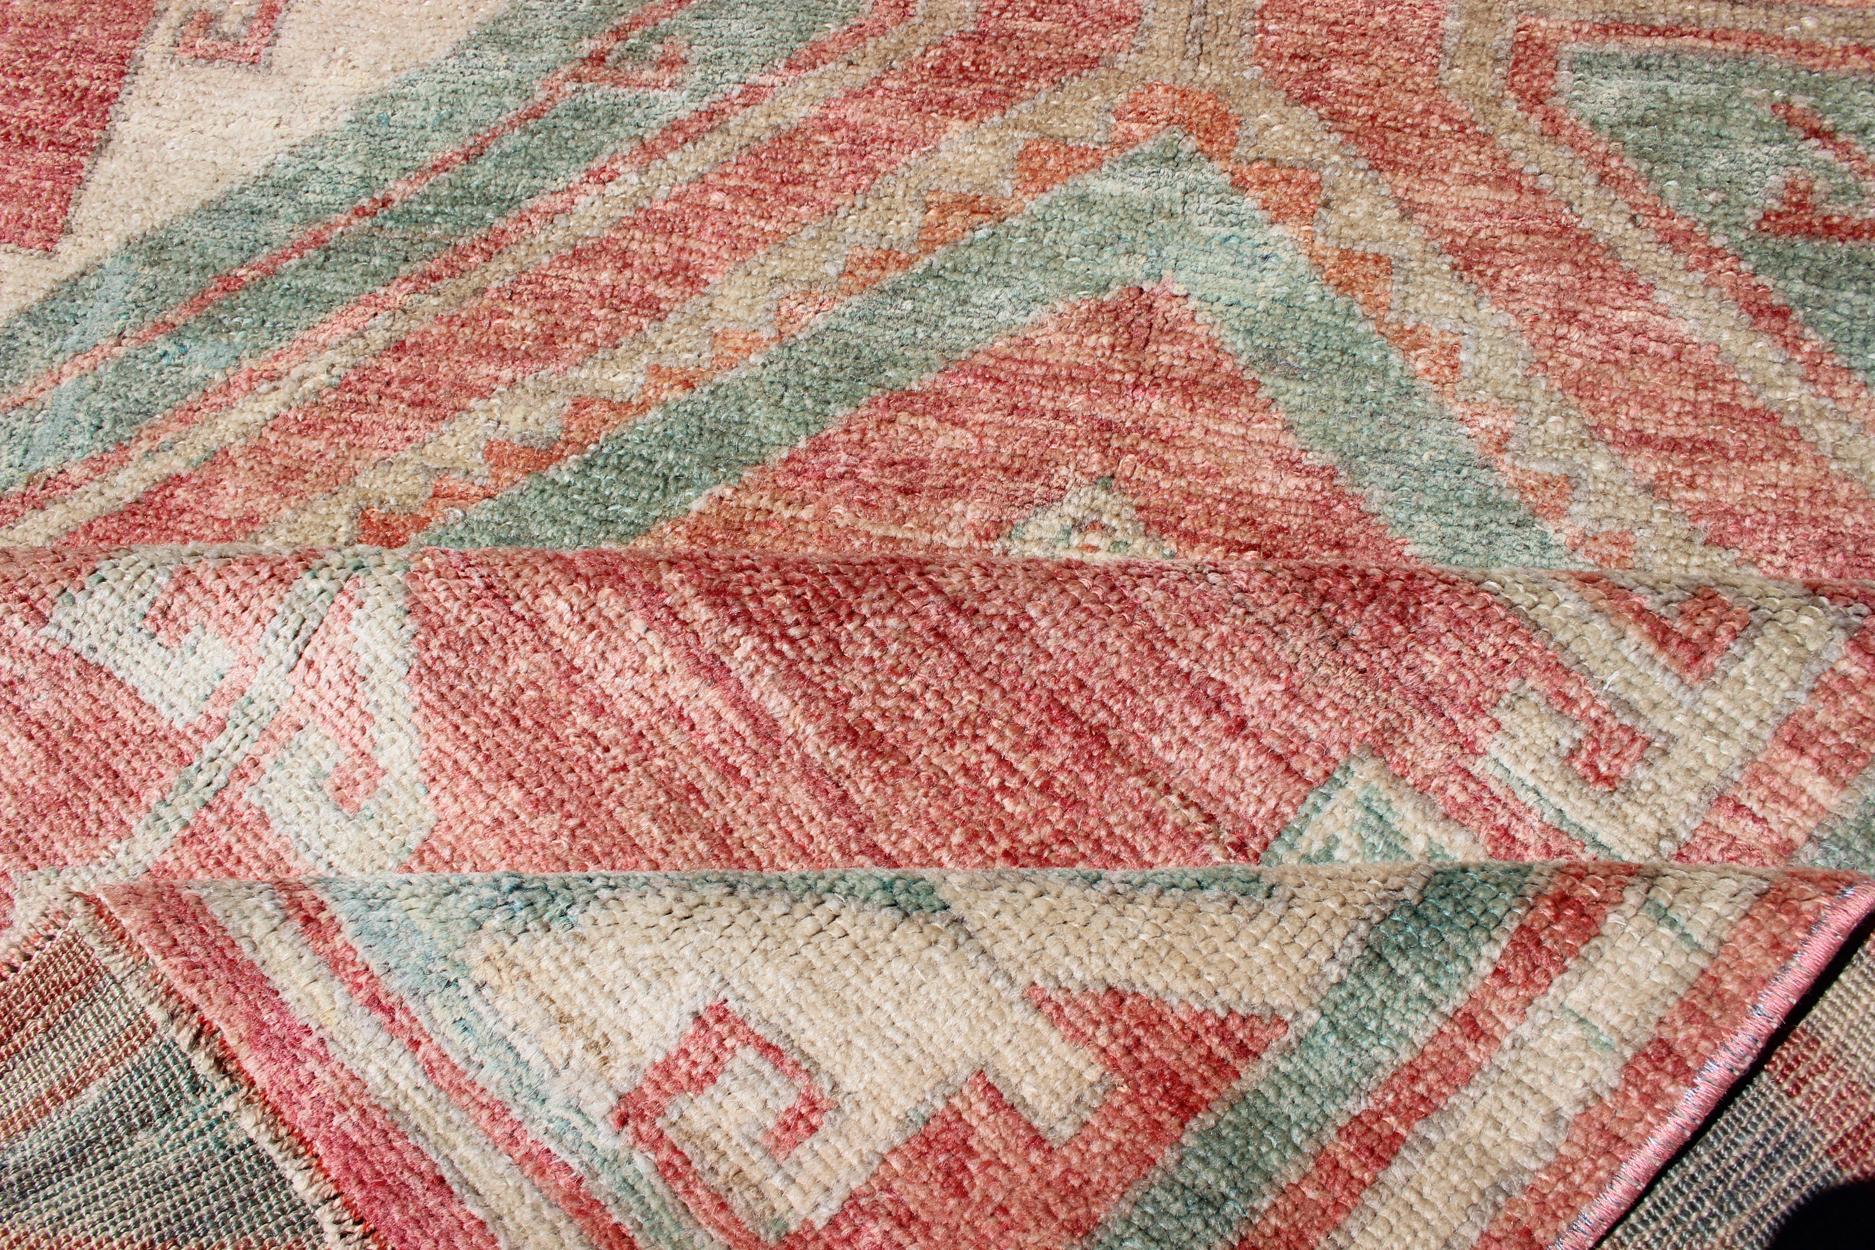 Vintage Oushak Runner in Aqua and Soft, Rosy Red In Good Condition For Sale In Atlanta, GA